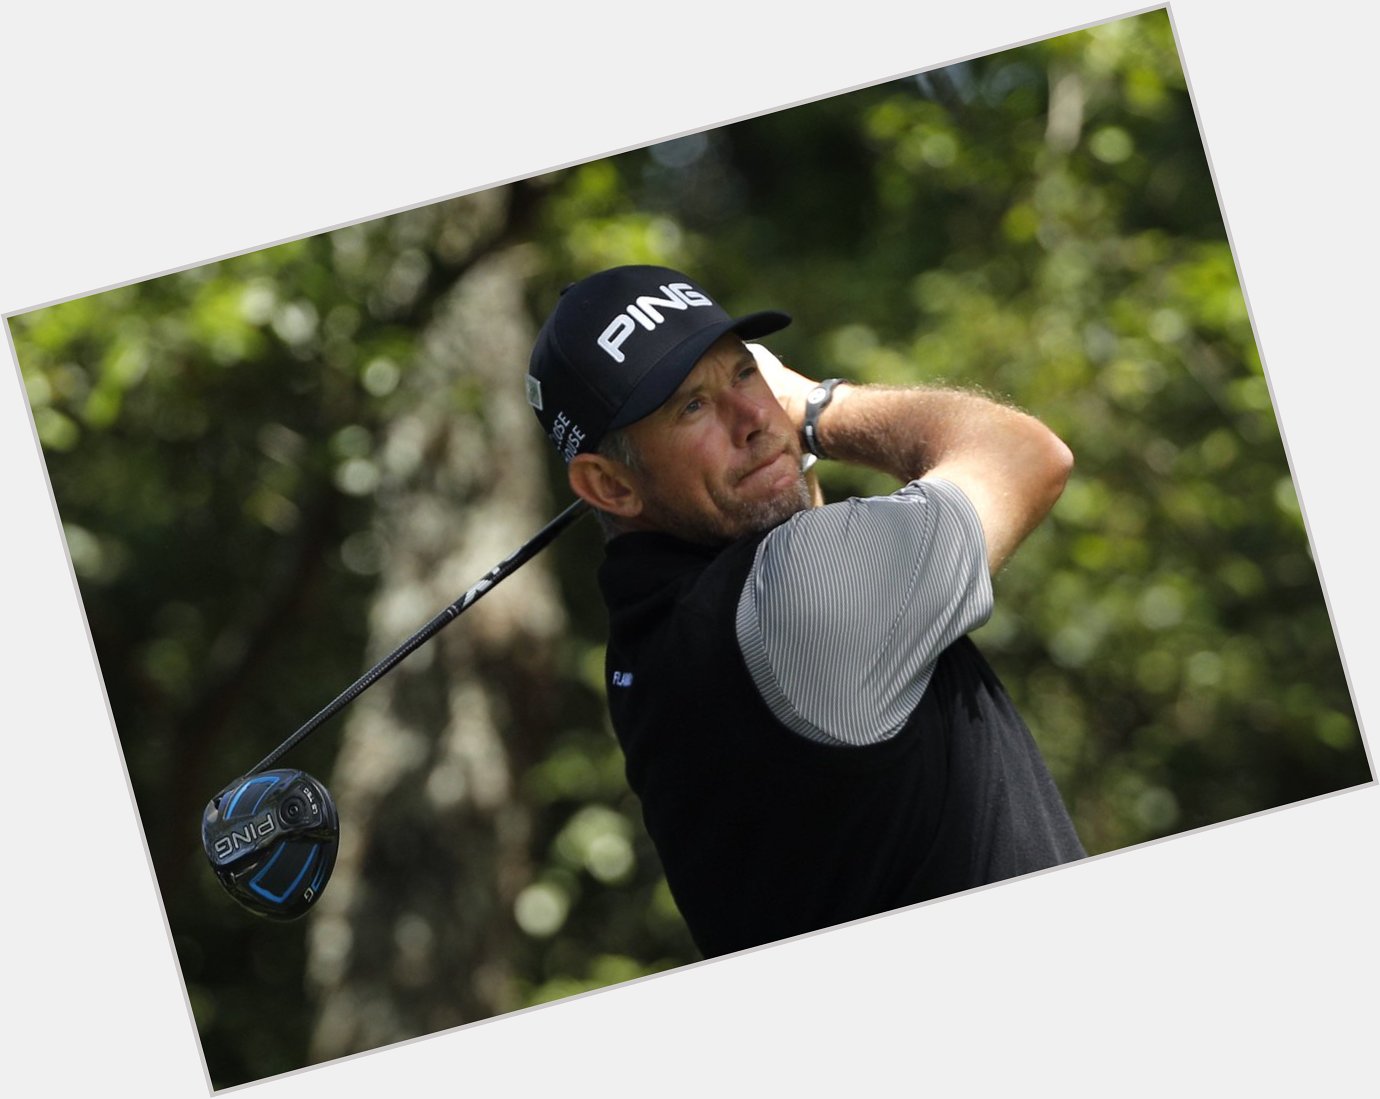 European Tour legend and outstanding ambassador for the game of golf, Happy Birthday Mr Lee Westwood.  